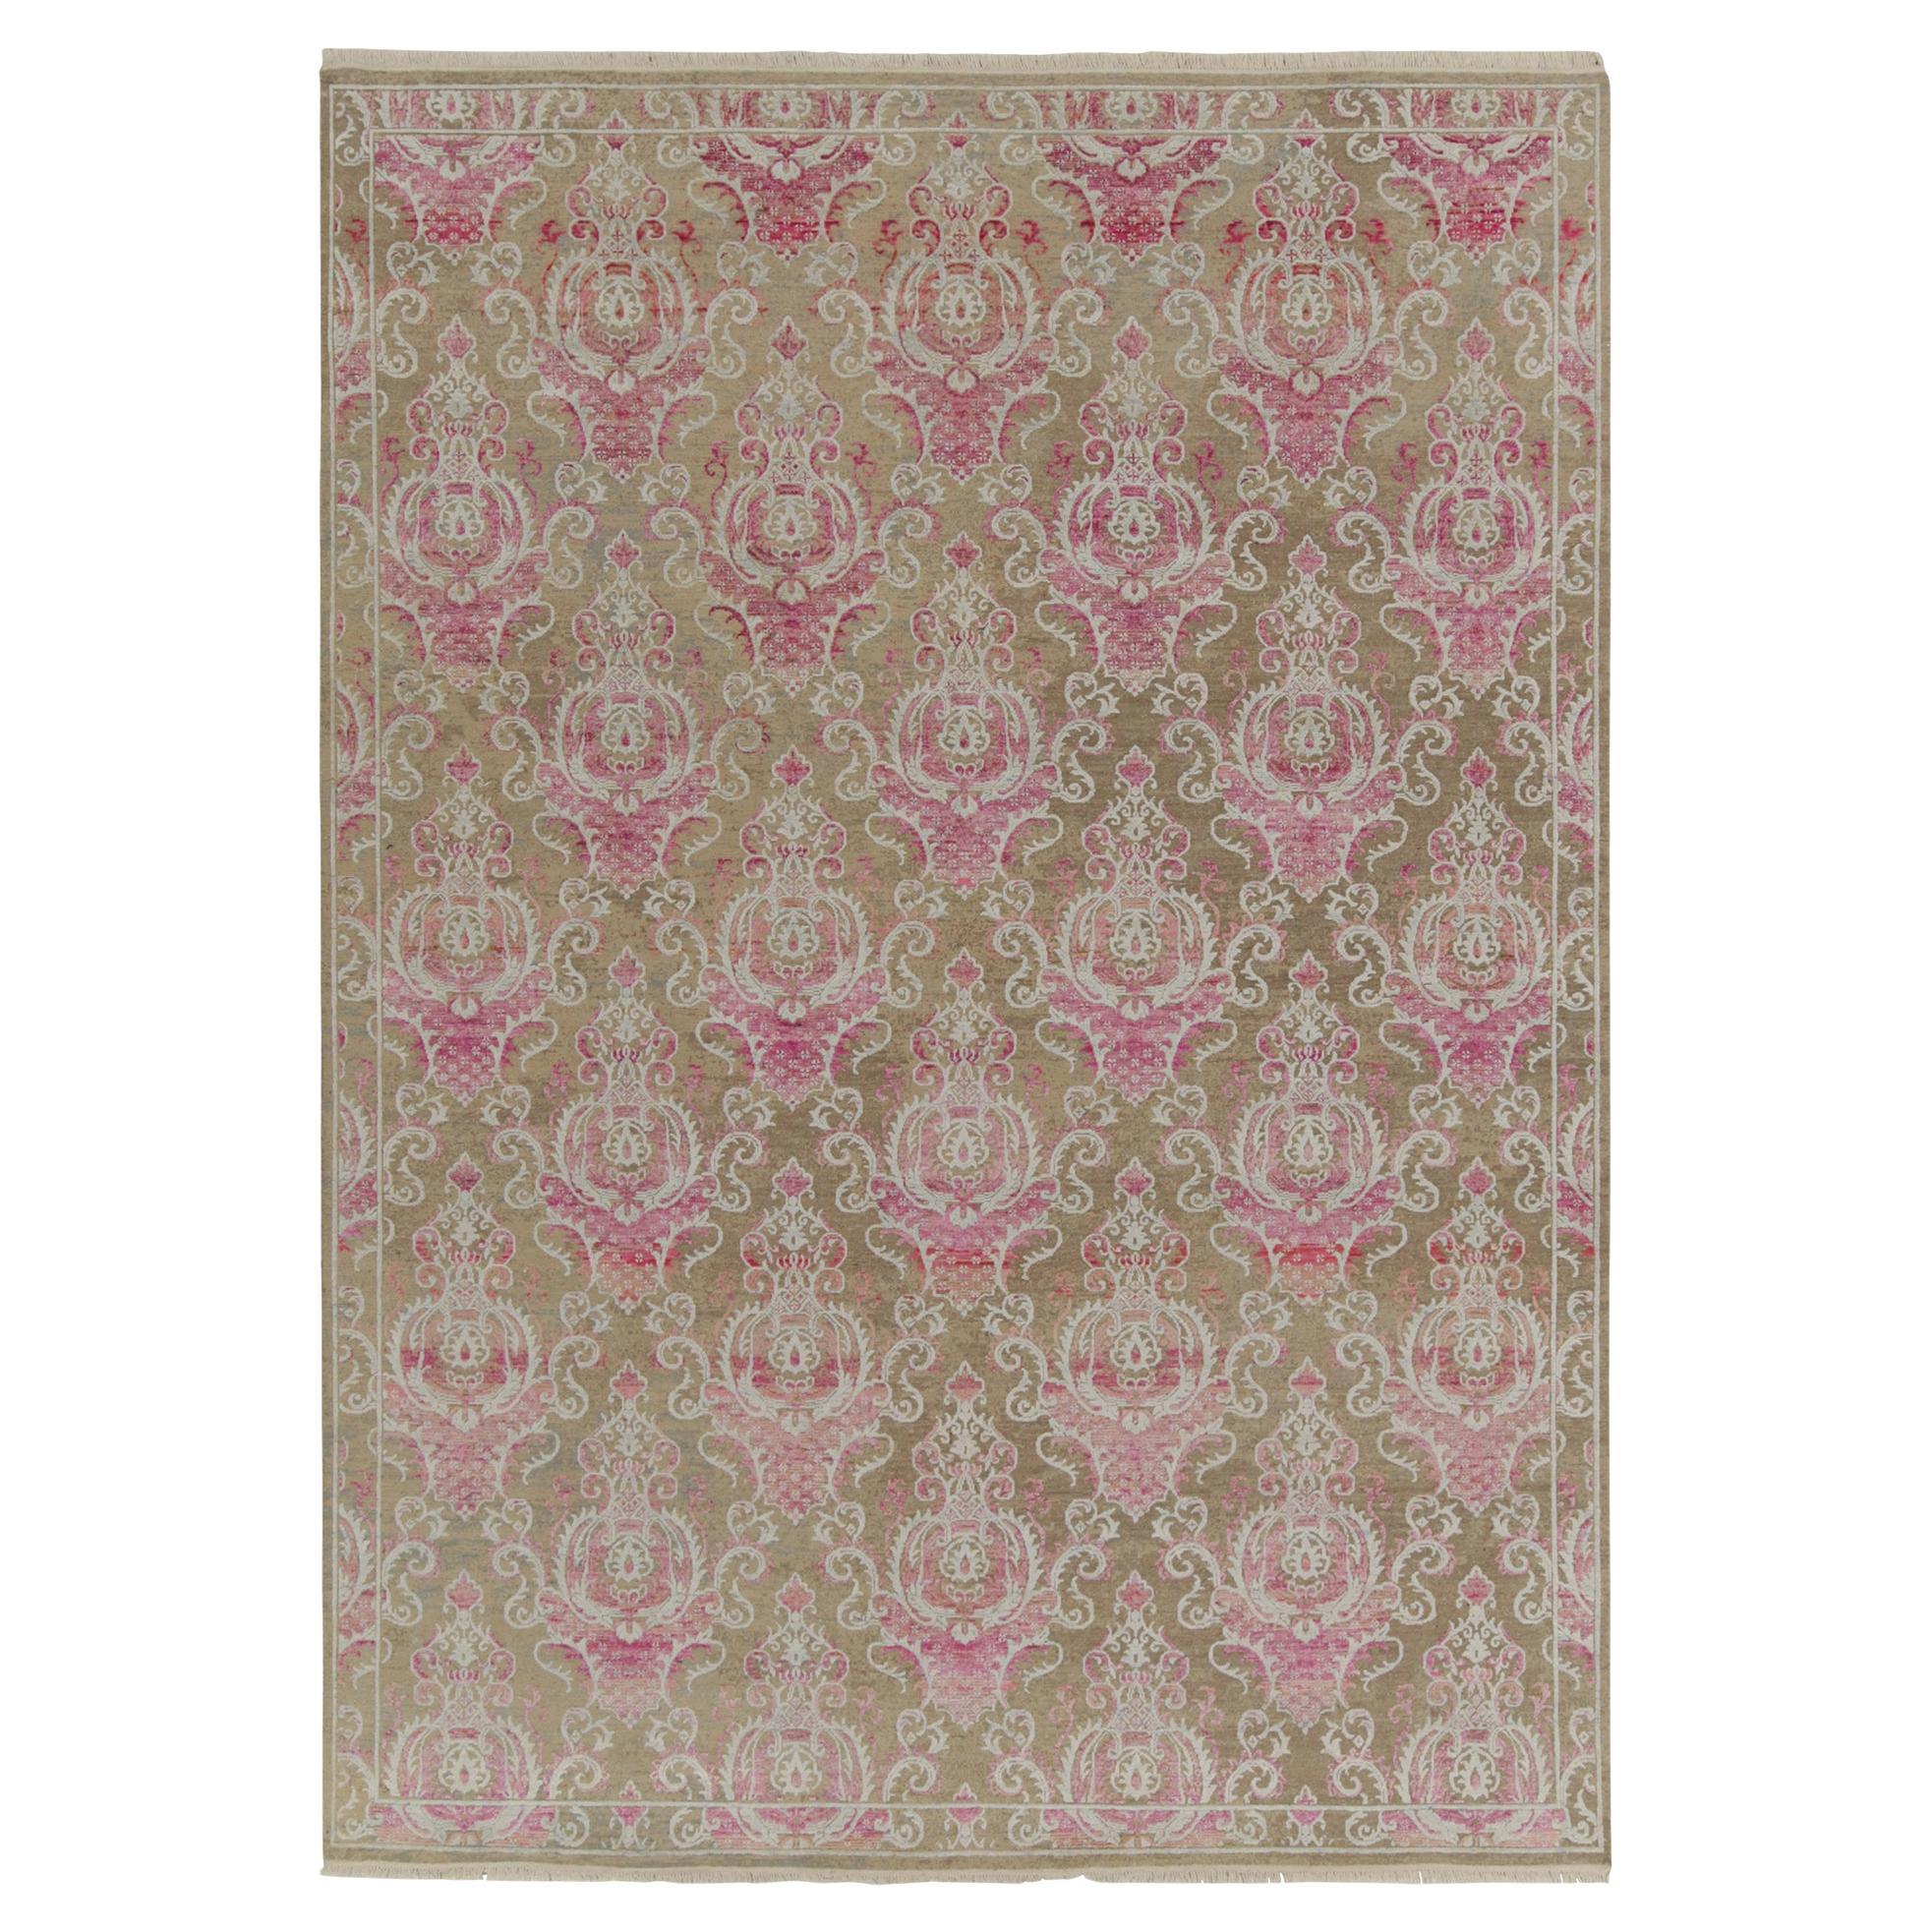 Rug & Kilim’s Classic Style rug in Beige with Pink and Pale Blue Floral Patterns